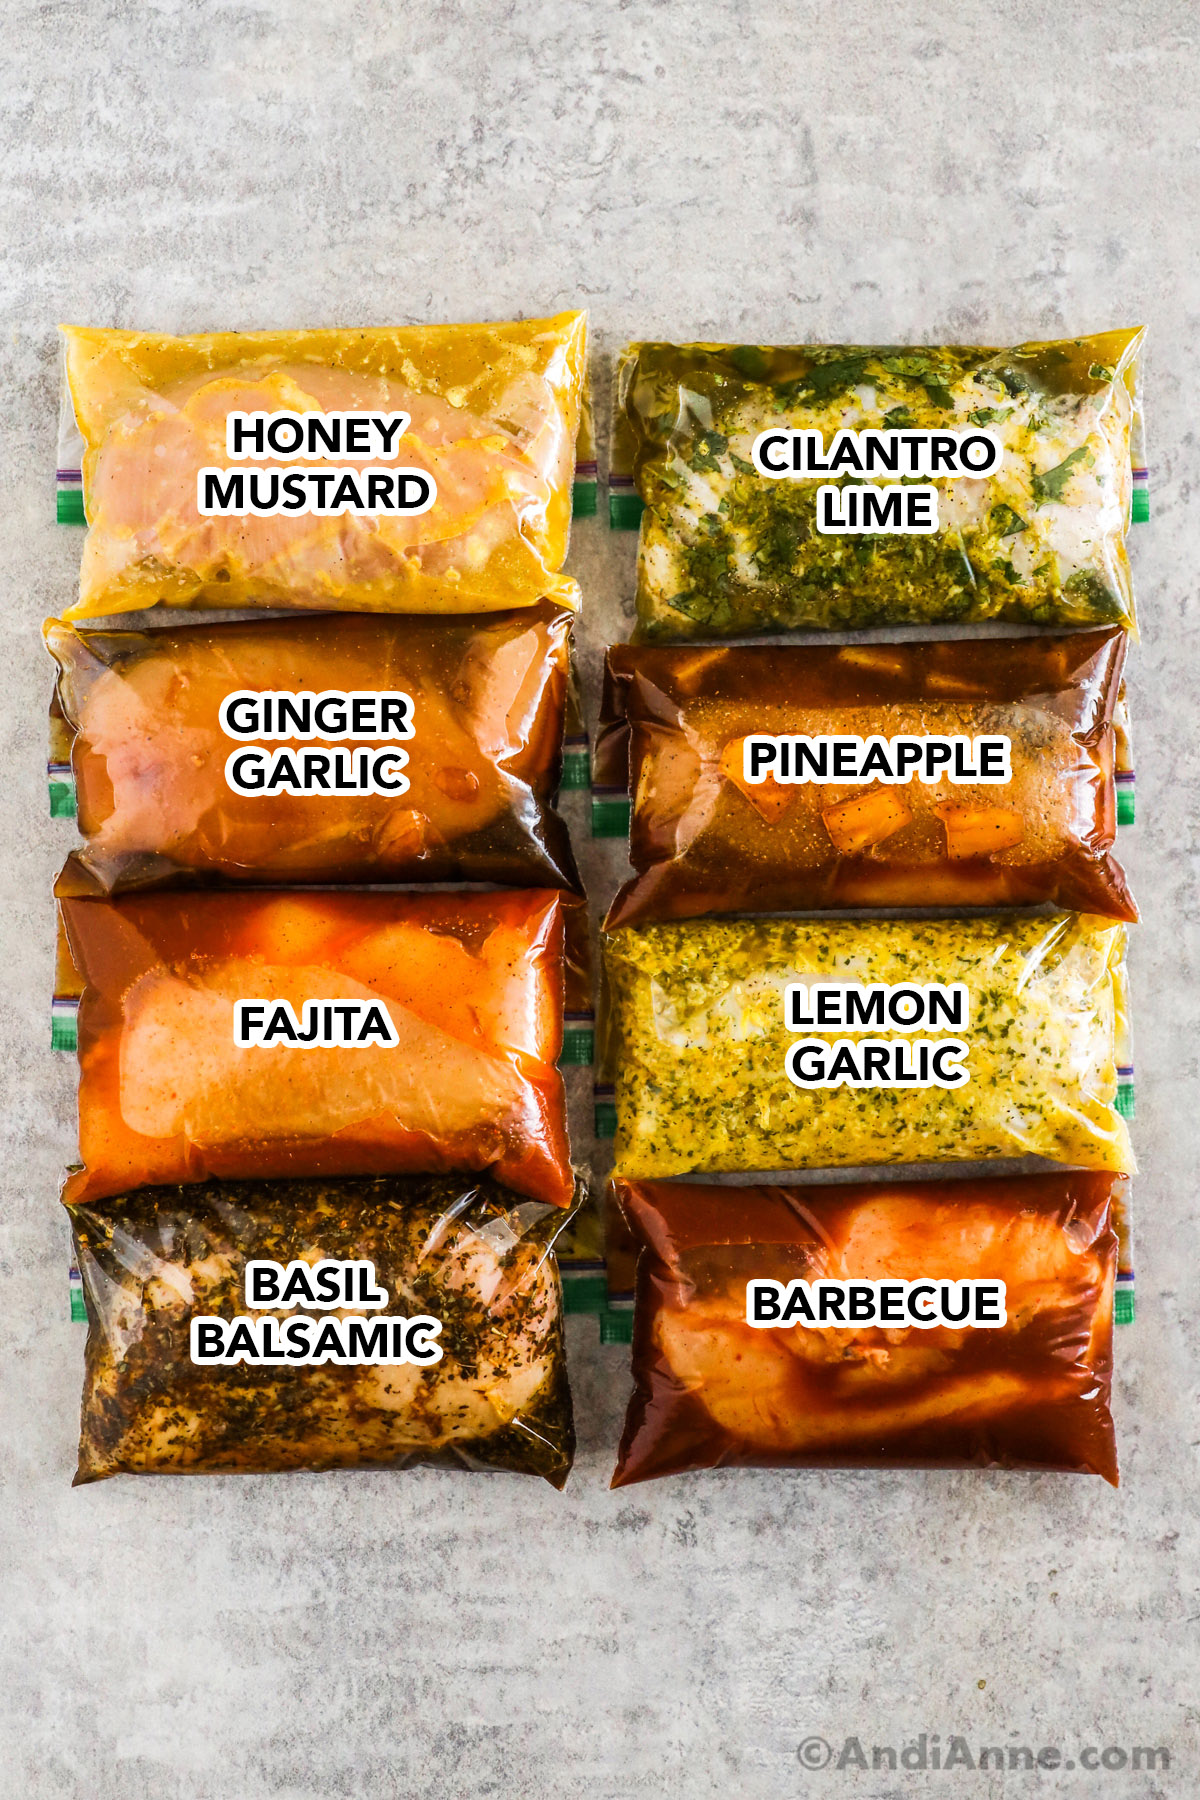 8 raw chicken breasts in ziploc bags with marinade in each. Flavors include honey mustard, cilantro lime, ginger garlic, pineapple, fajita, lemon garlic, basil balsamic, and barbecue.